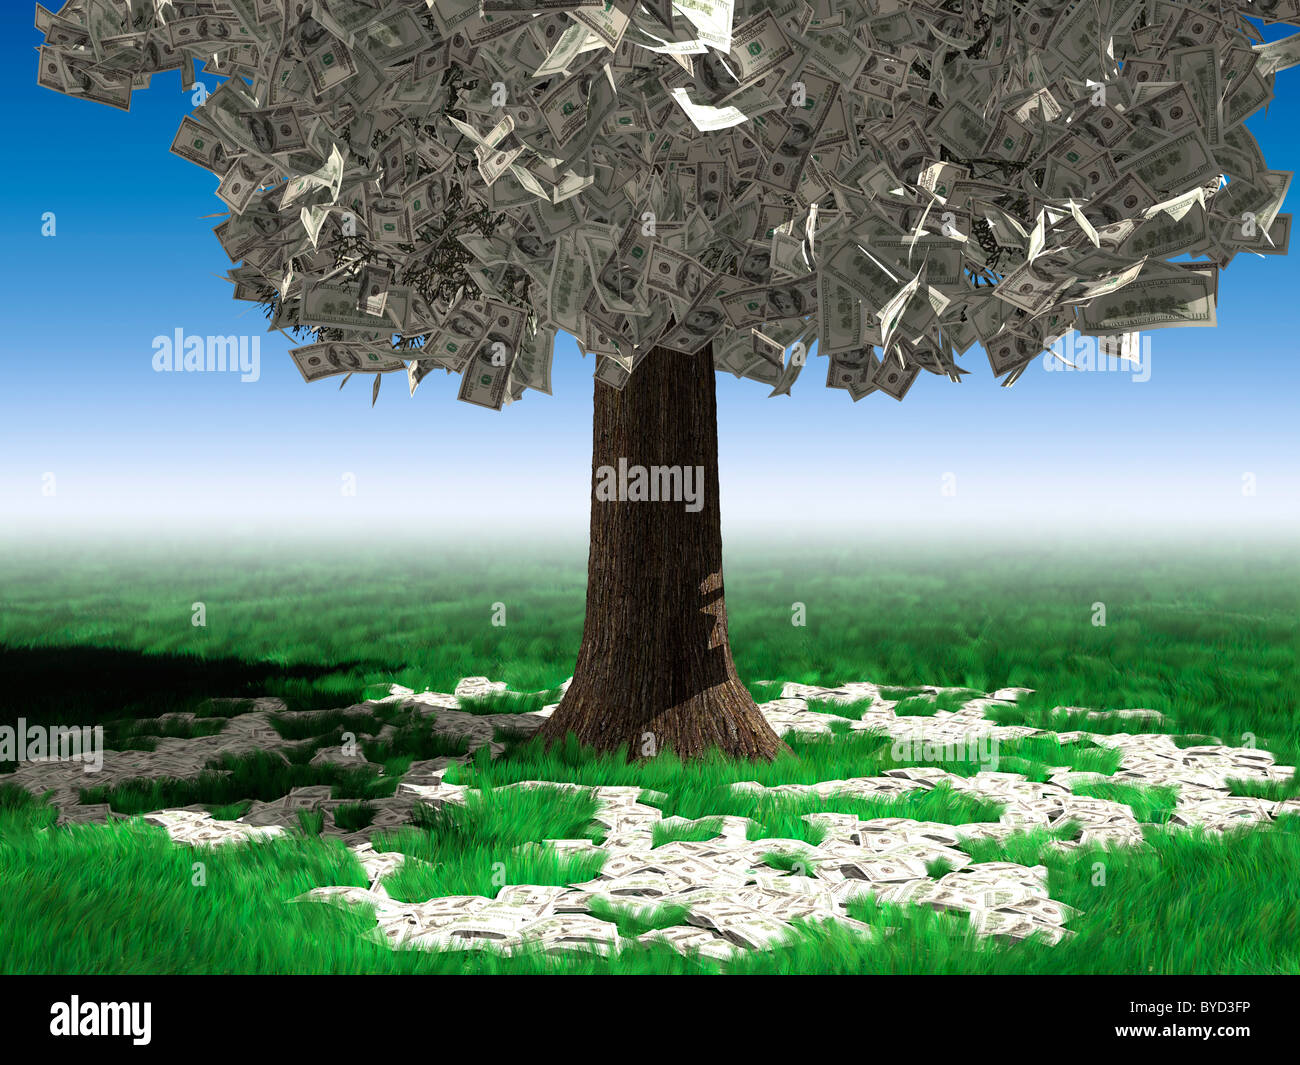 Money tree with hundred dollar bills growing on it and lying on green grass under it. Investment concept Stock Photo